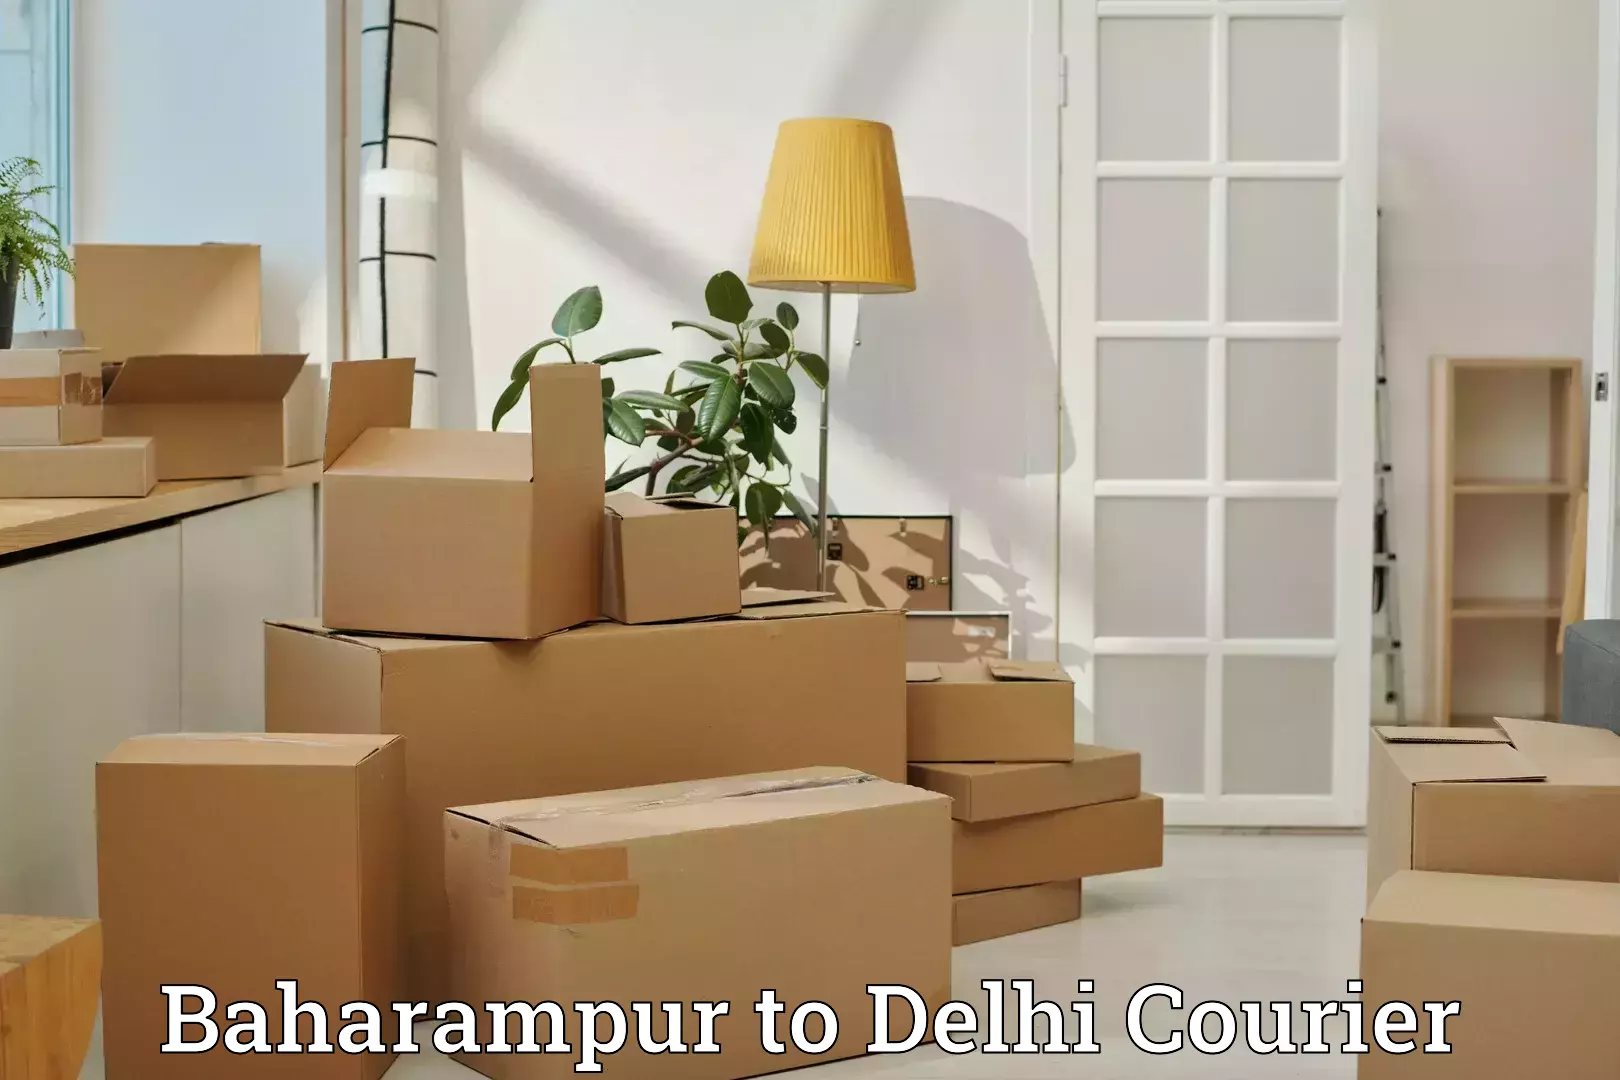 Luggage transfer service Baharampur to NCR